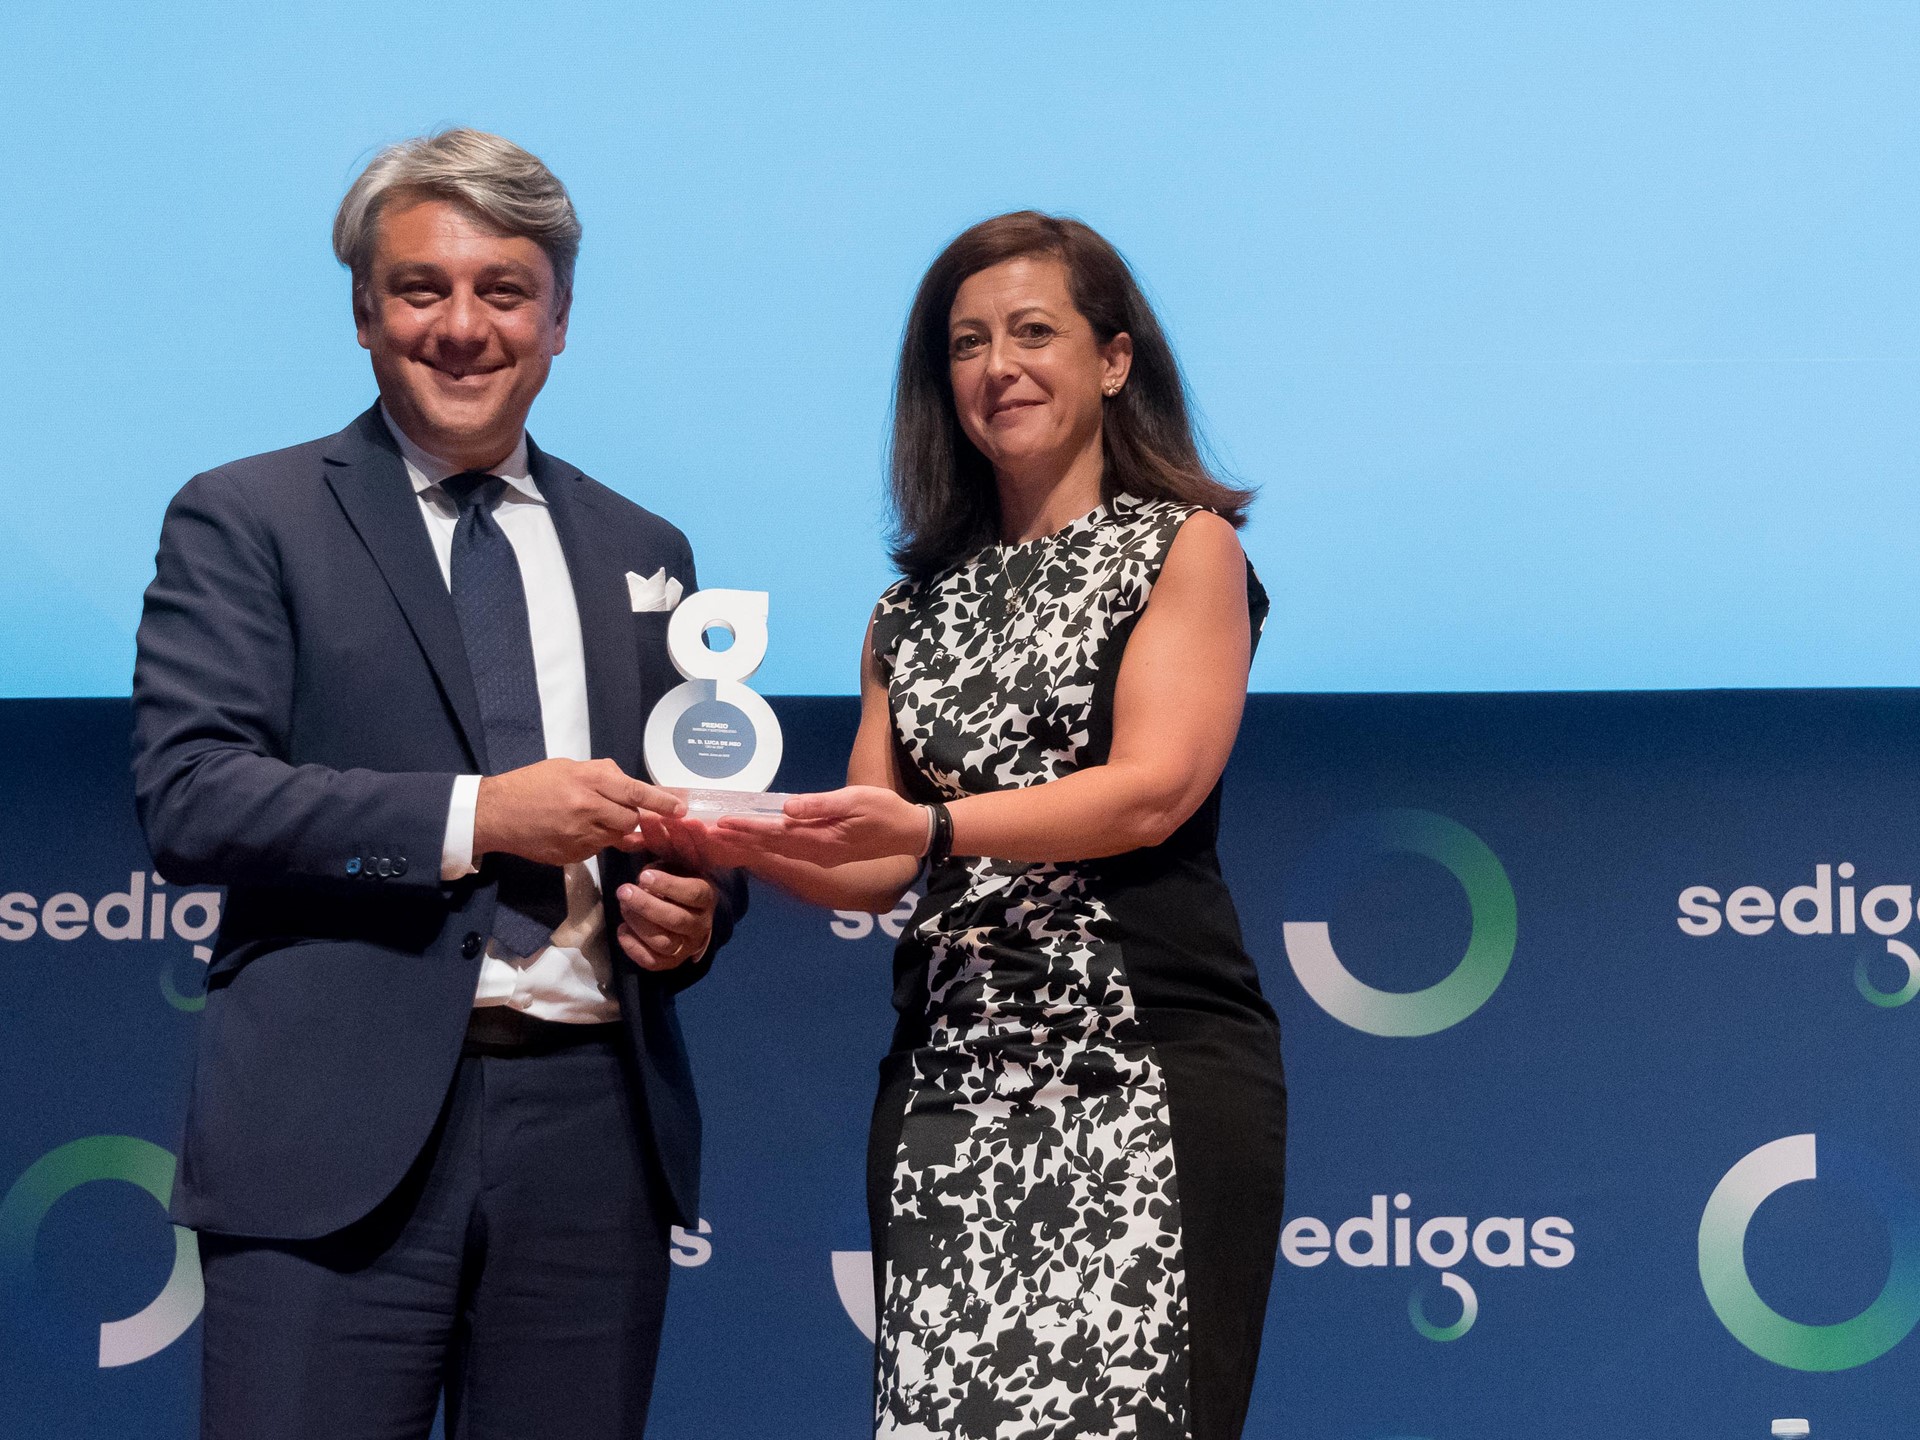 Luca de Meo recieved the “Energy and Sustainability” award from Rosa ...